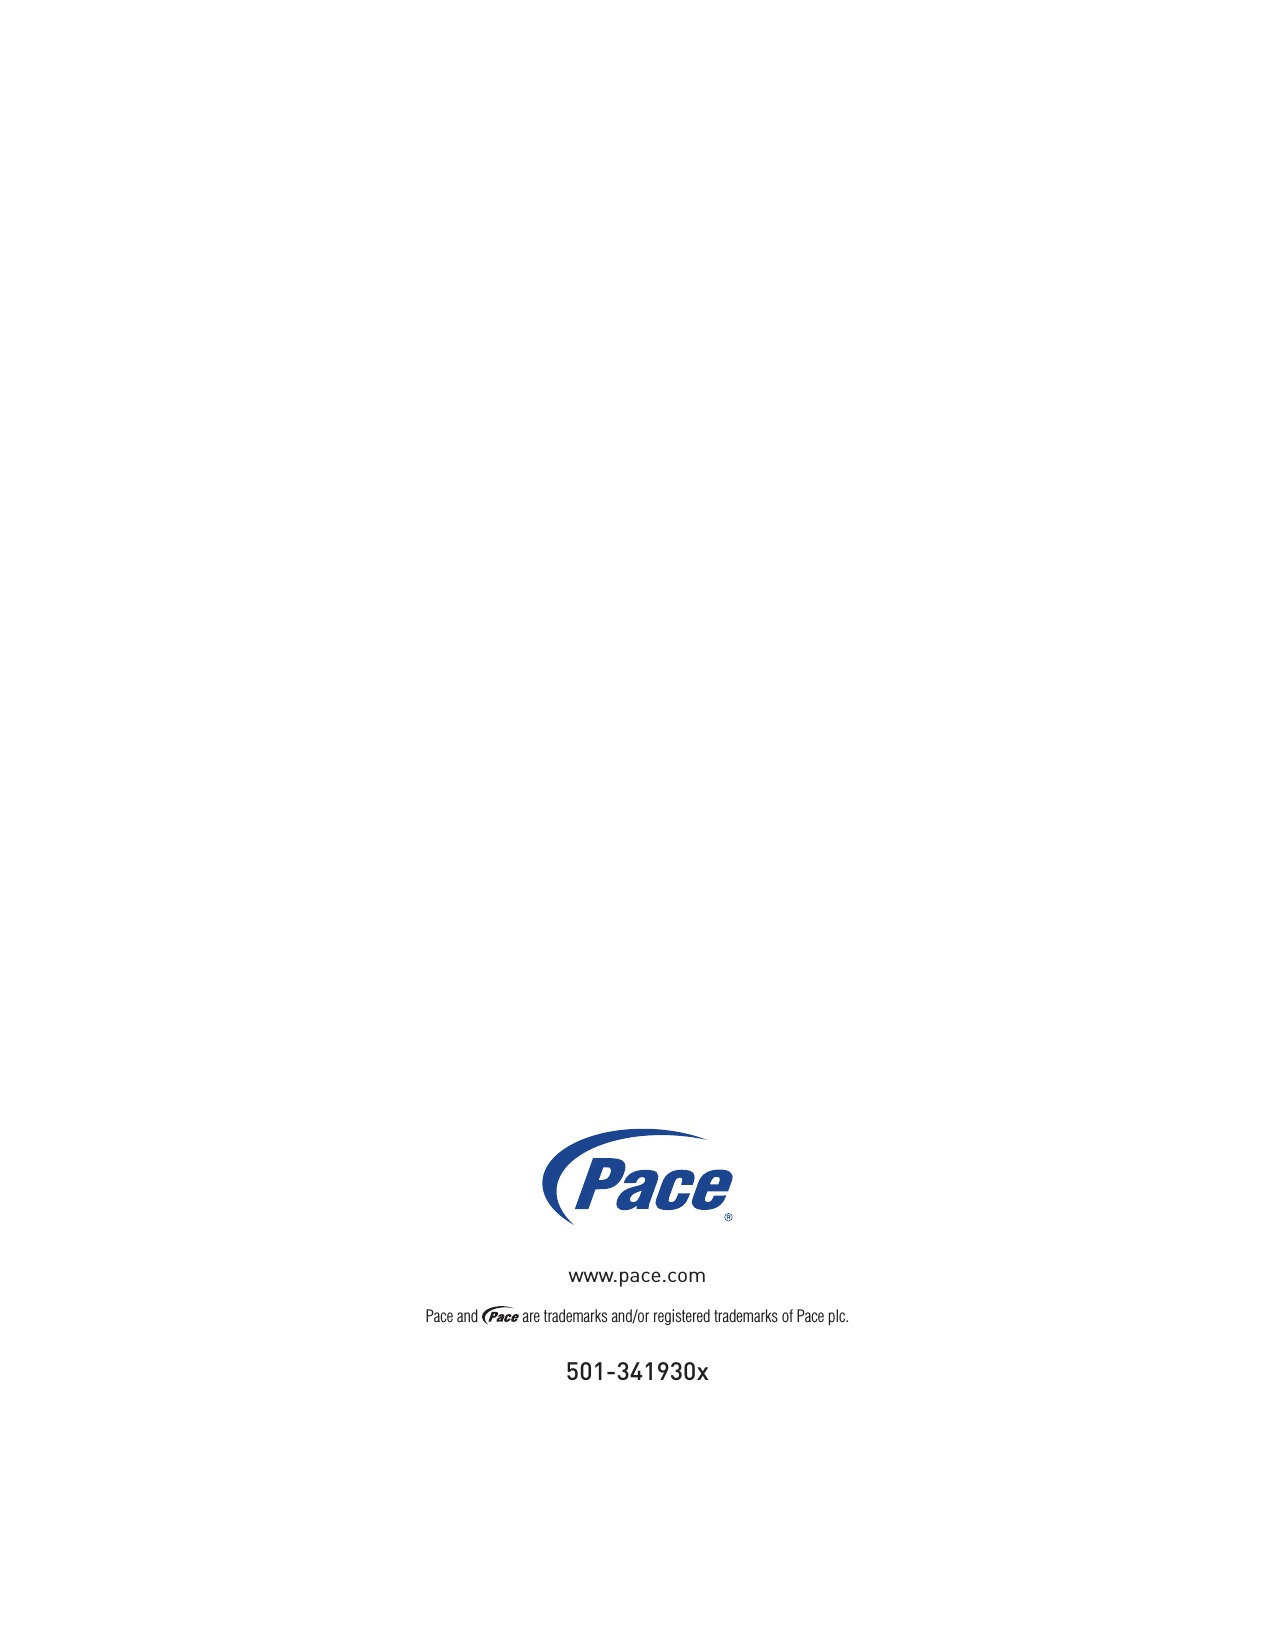 501-341930xPace and   are trademarks and/or registered trademarks of Pace plc.www.pace.com